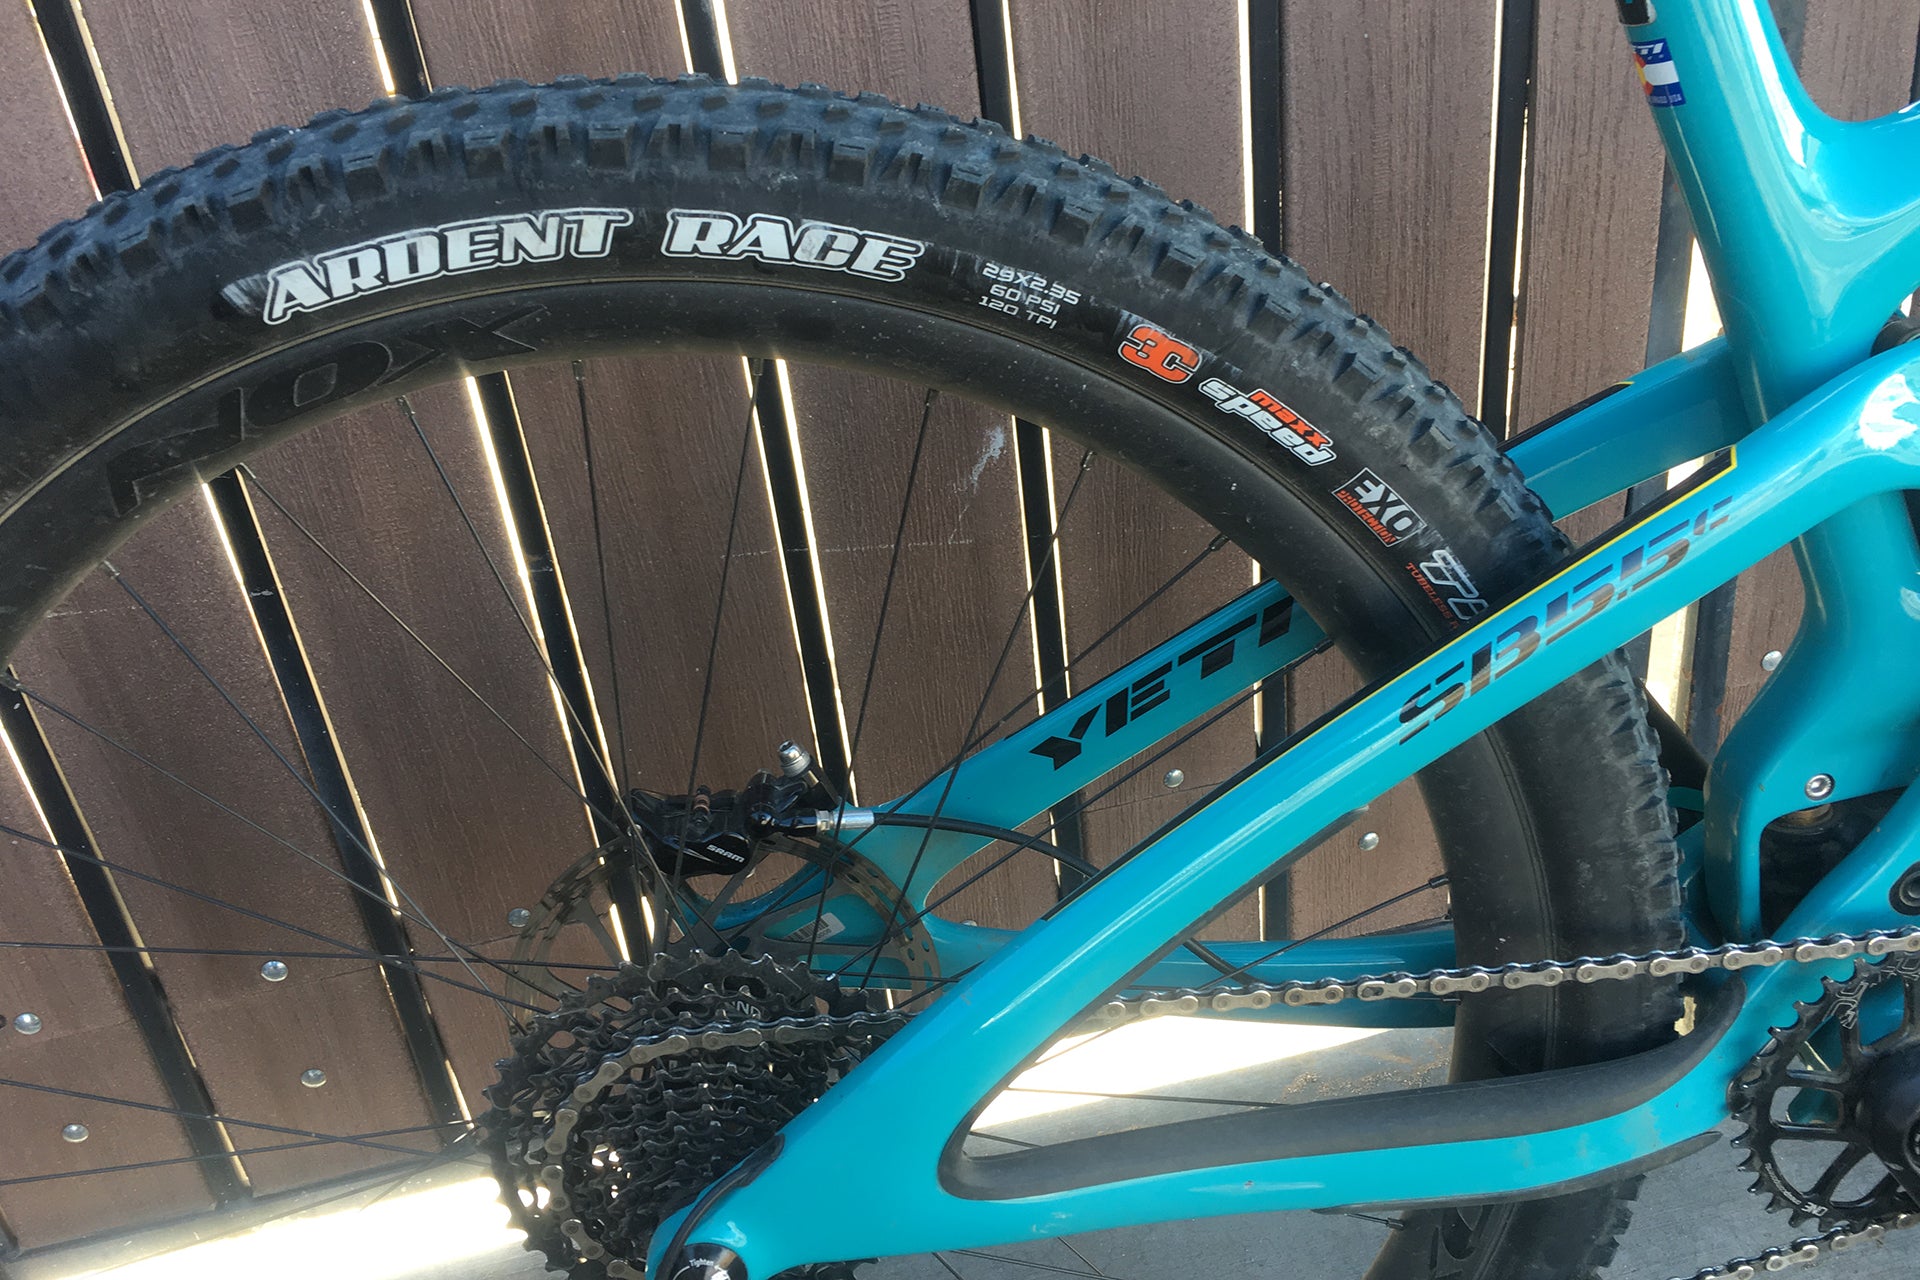 Customer Review: Maxxis Ardent Race Tire